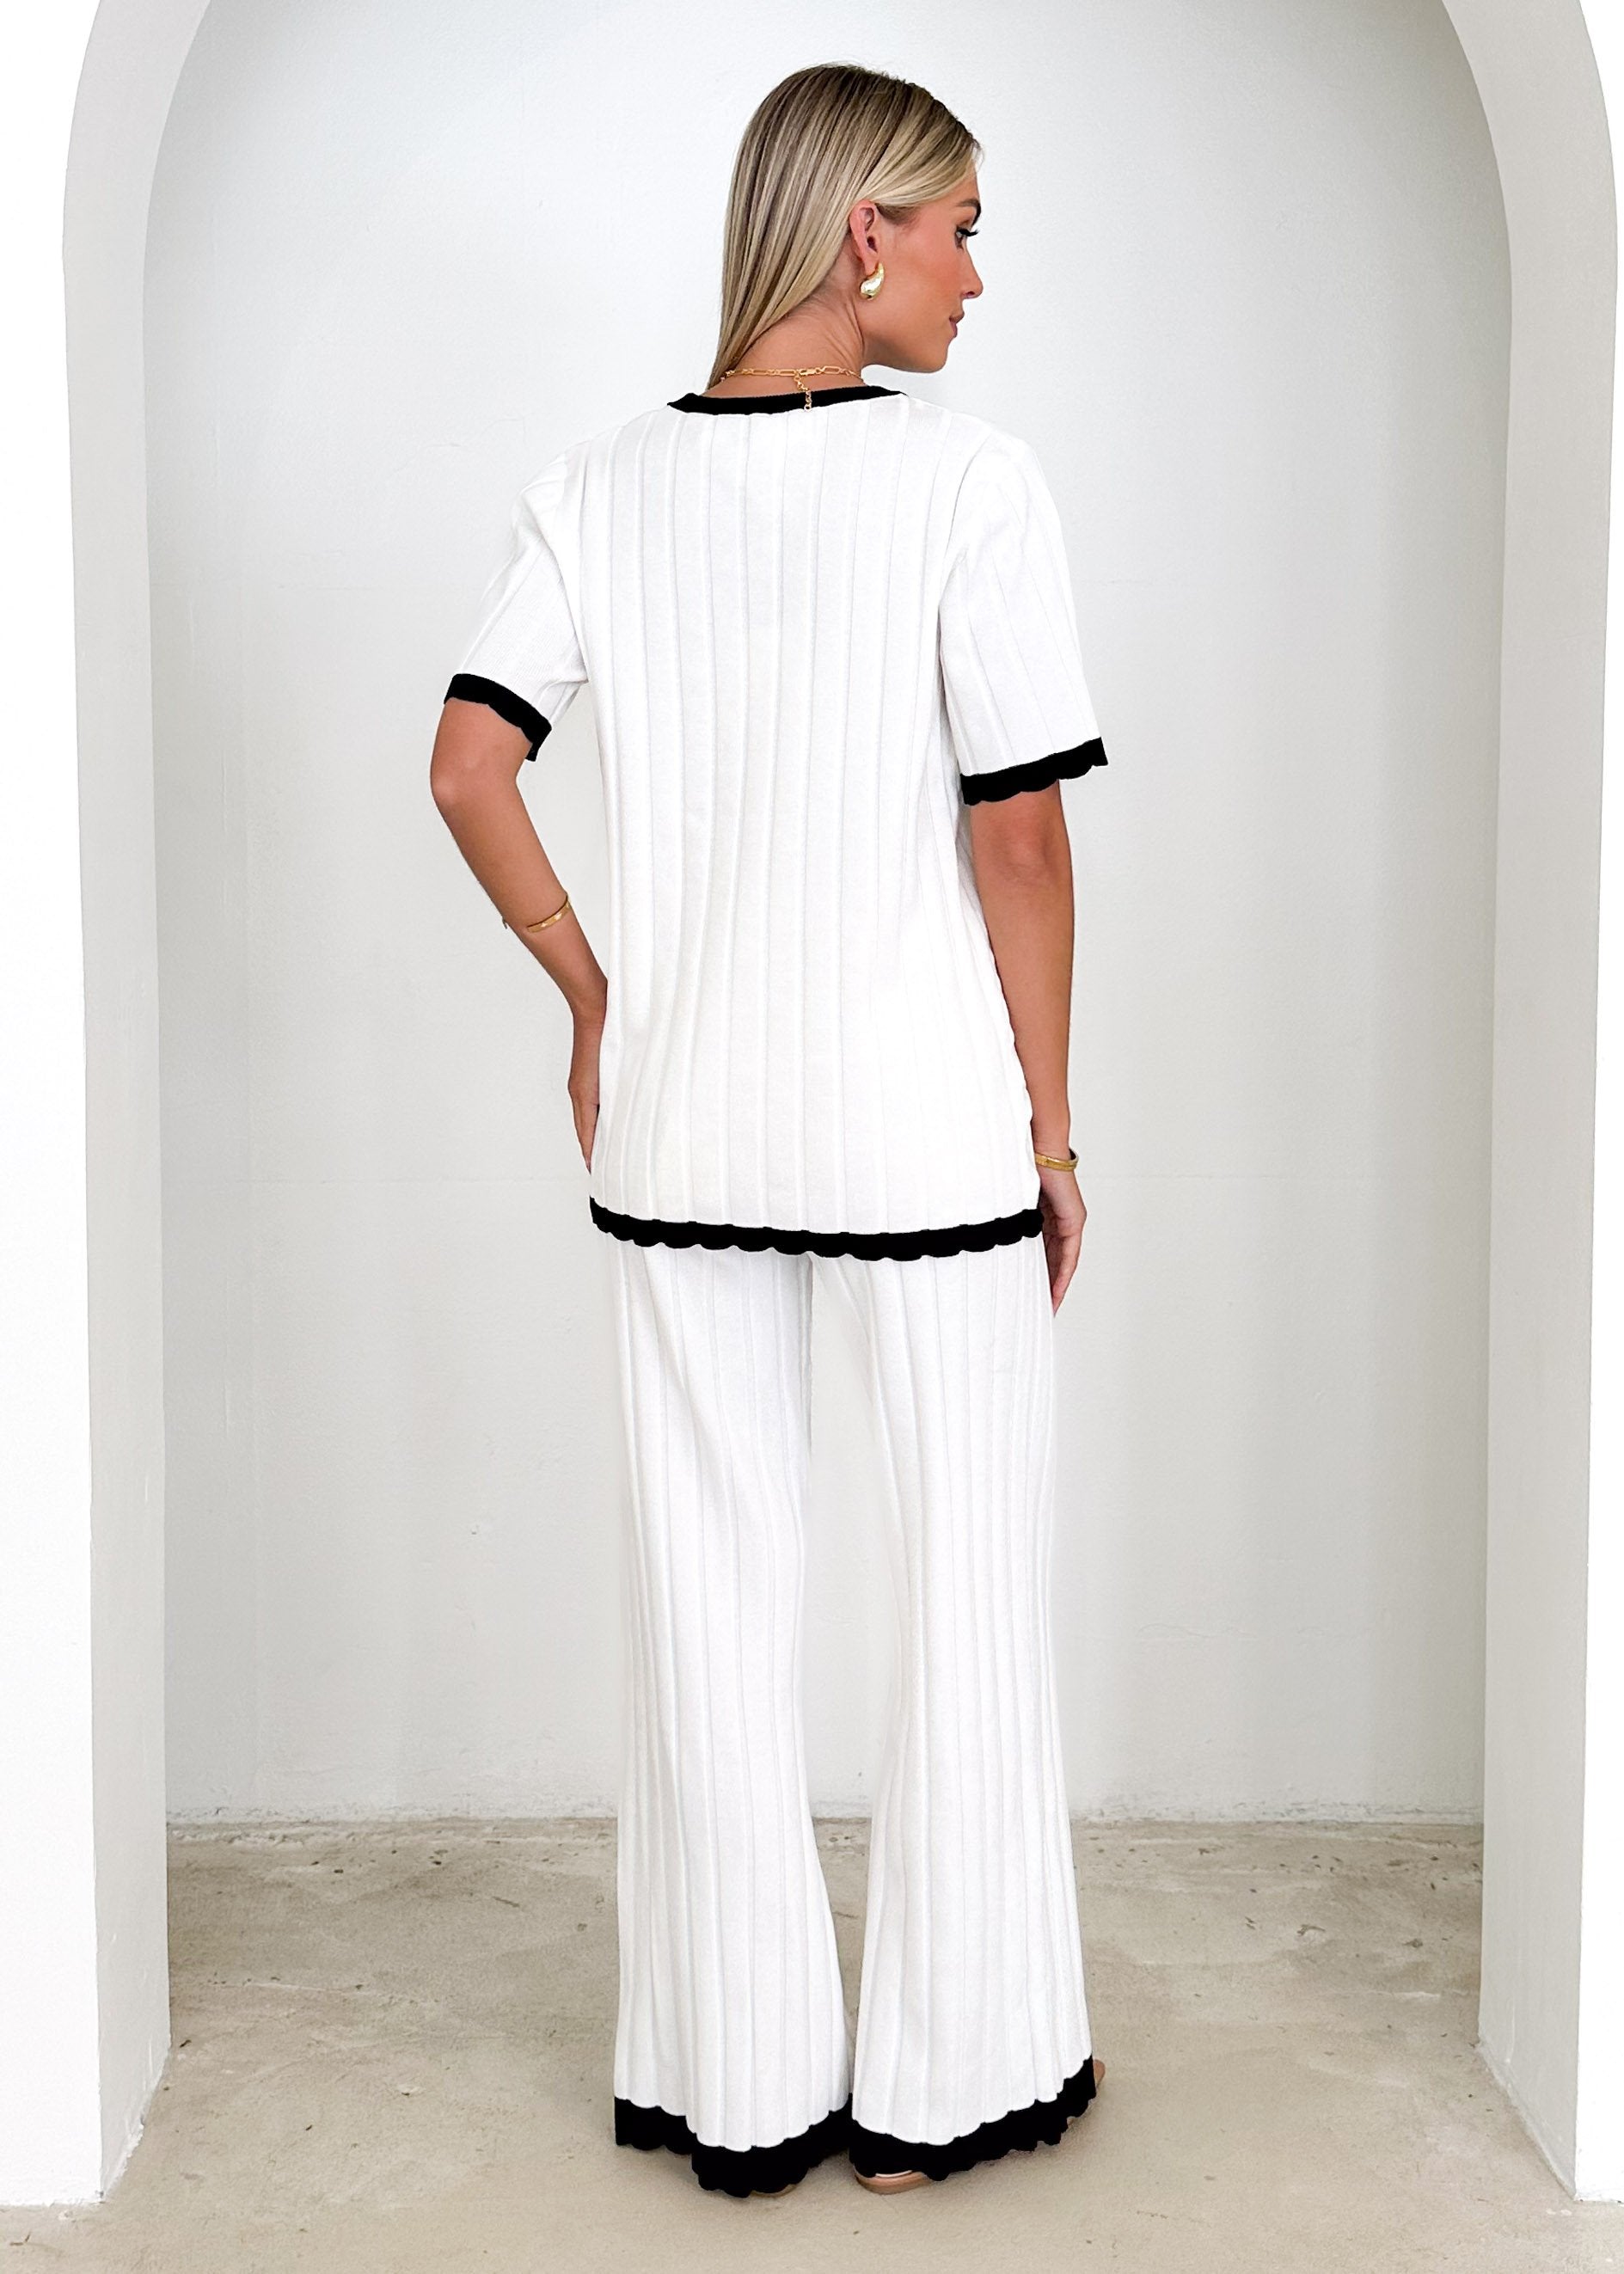 Tienna Knit Pants - Off White